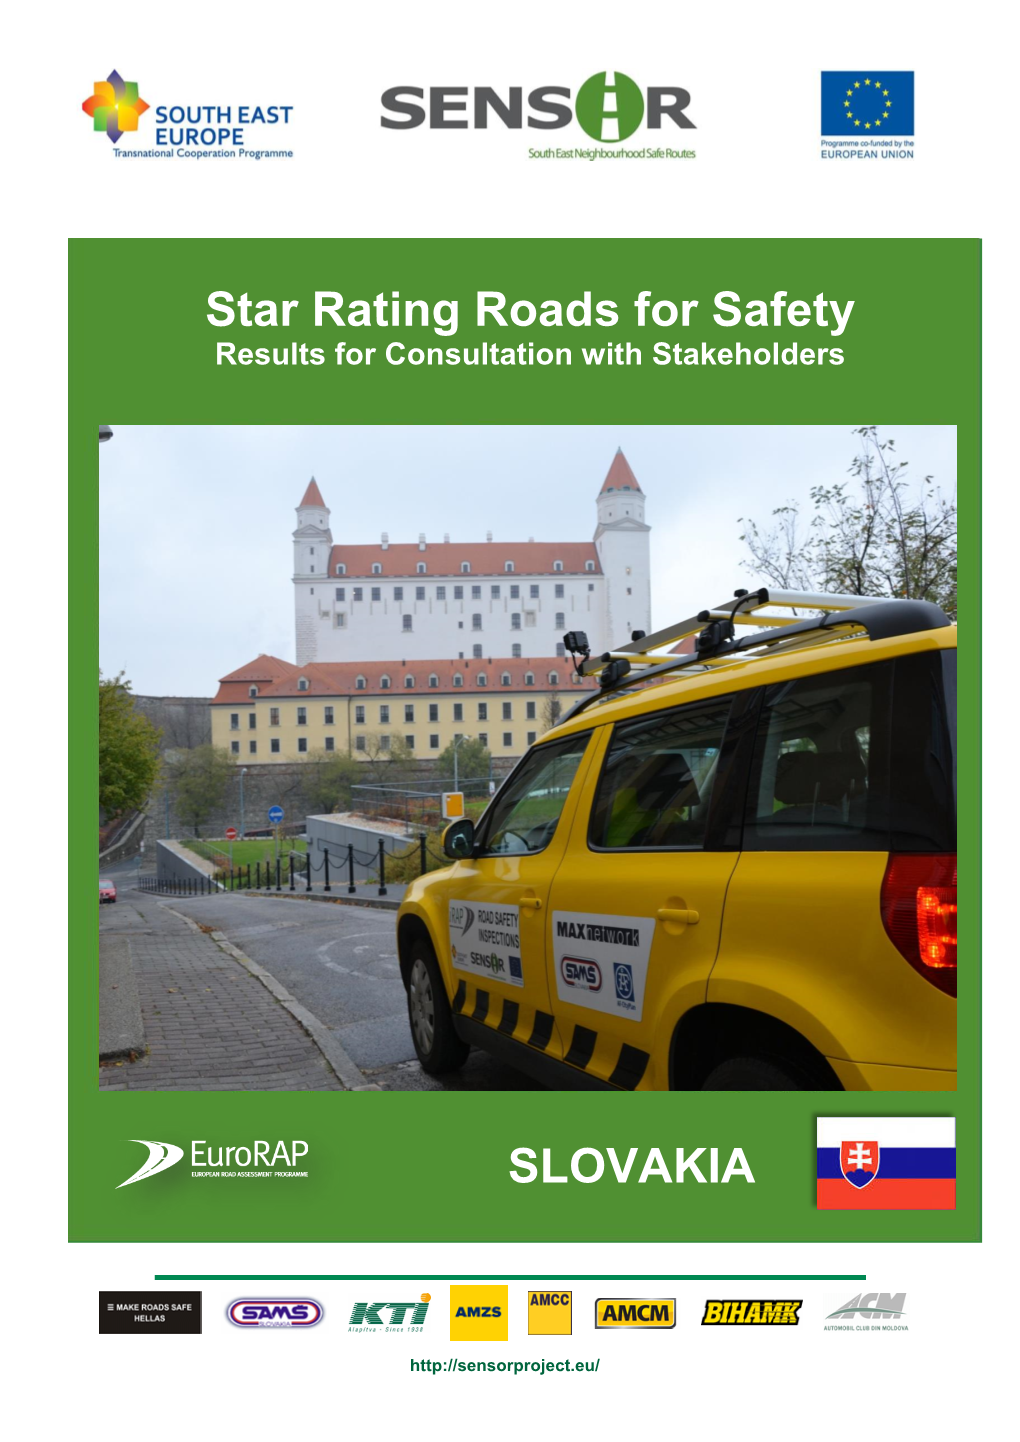 Star Rating Roads for Safety SLOVAKIA